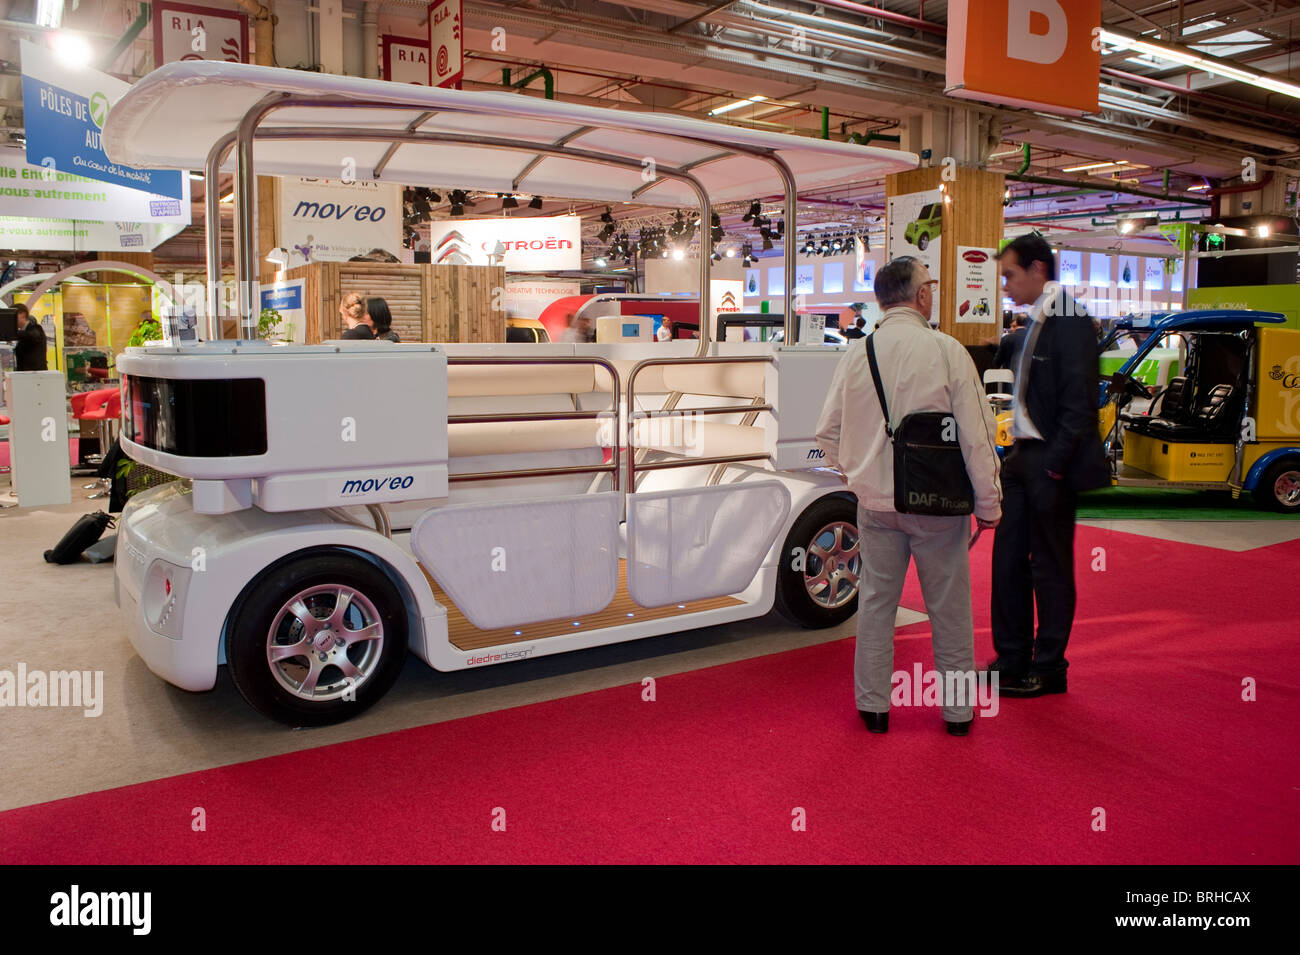 Paris, France, Paris Car Show , Electric Cars, 'Le Cybergo', Moveo, Automatic Drive People Mover, Green tech, on display at Trade Show Stock Photo